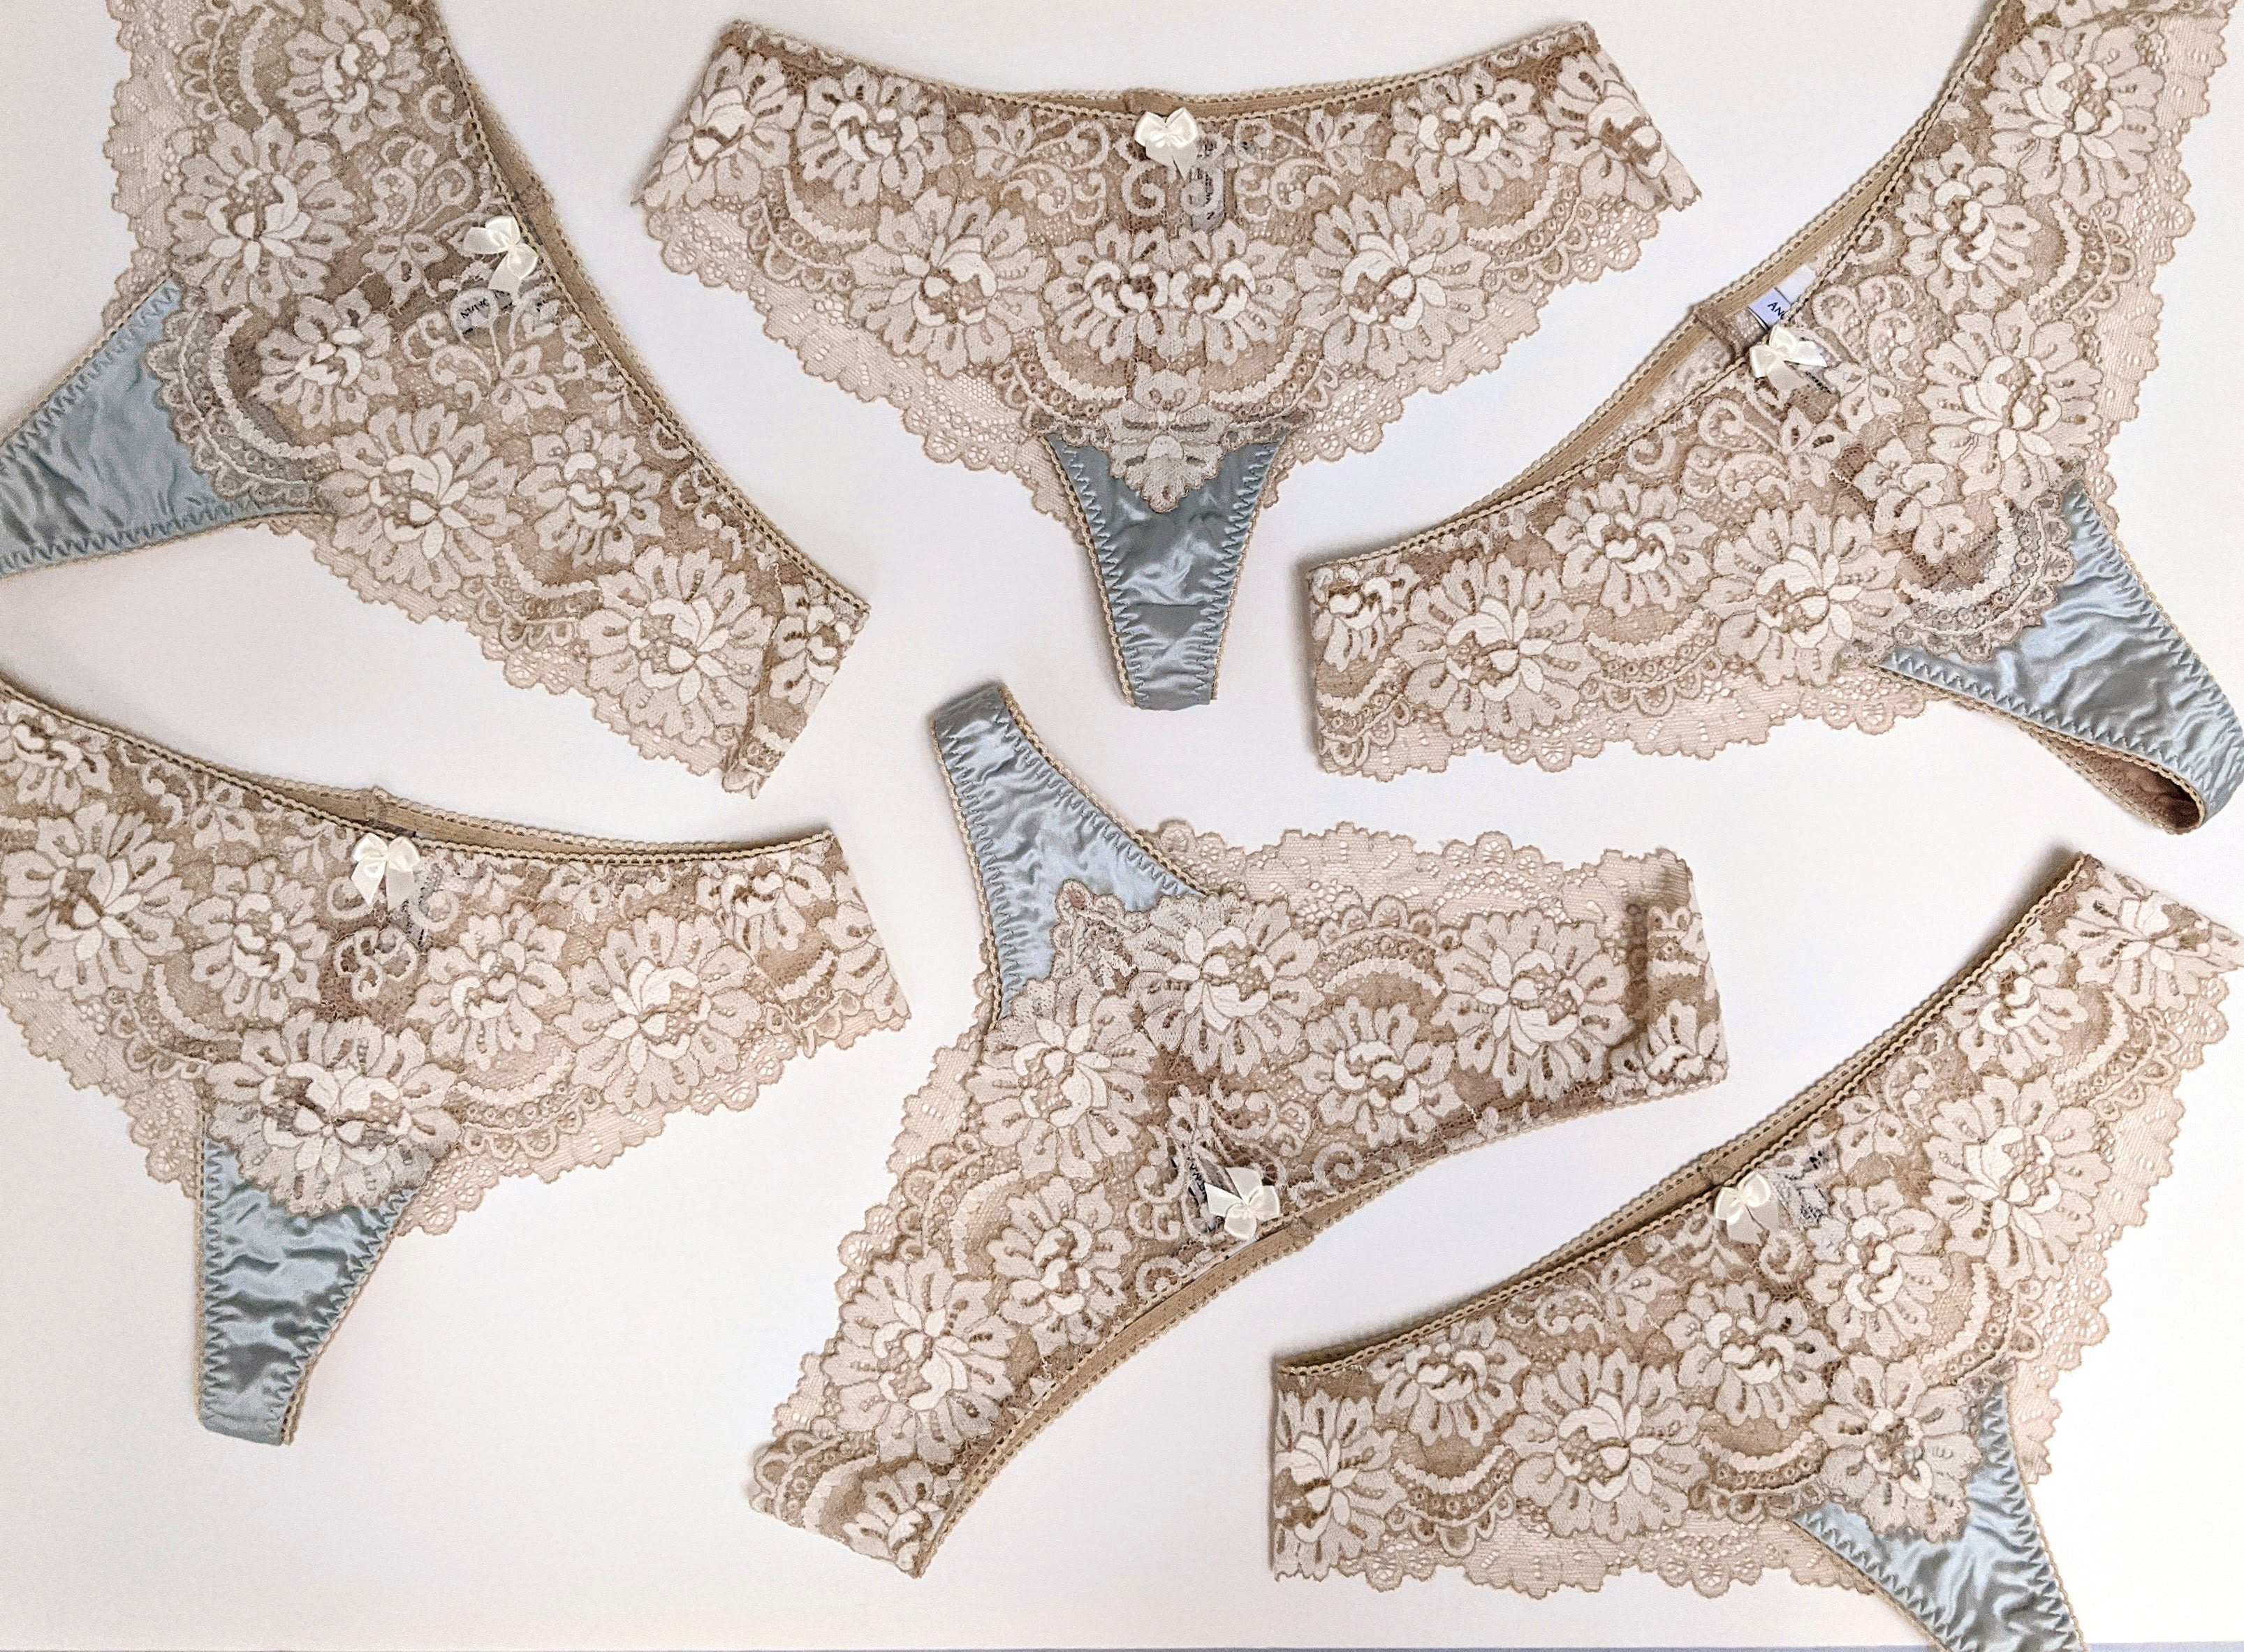 Antoinette knickers  Silk and lace underwear